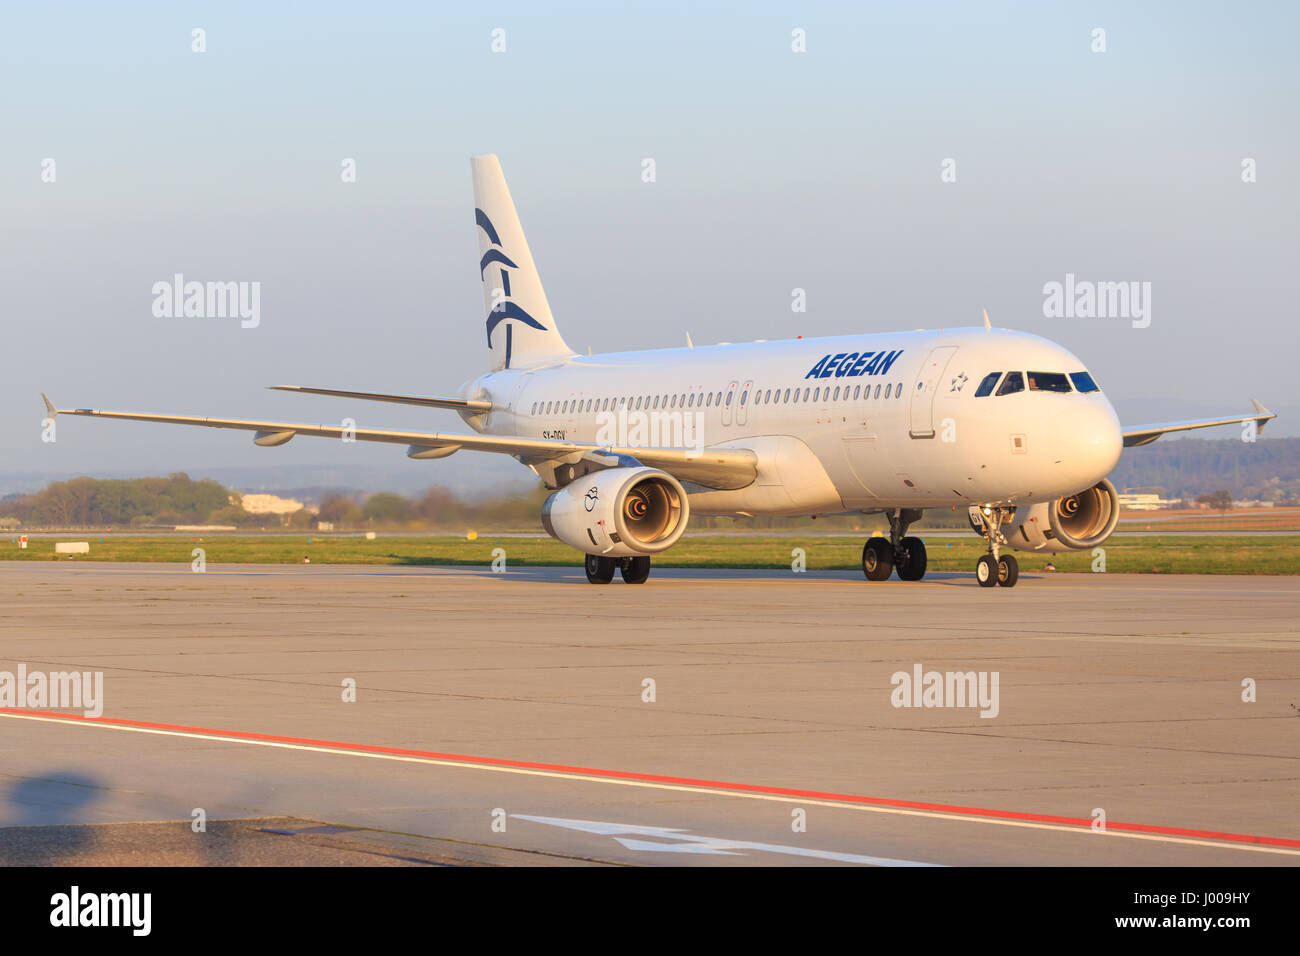 Stuttgart/Germany March 10, 2017: Airbus A320 from Aegan at Stuttgart Airport. Stock Photo